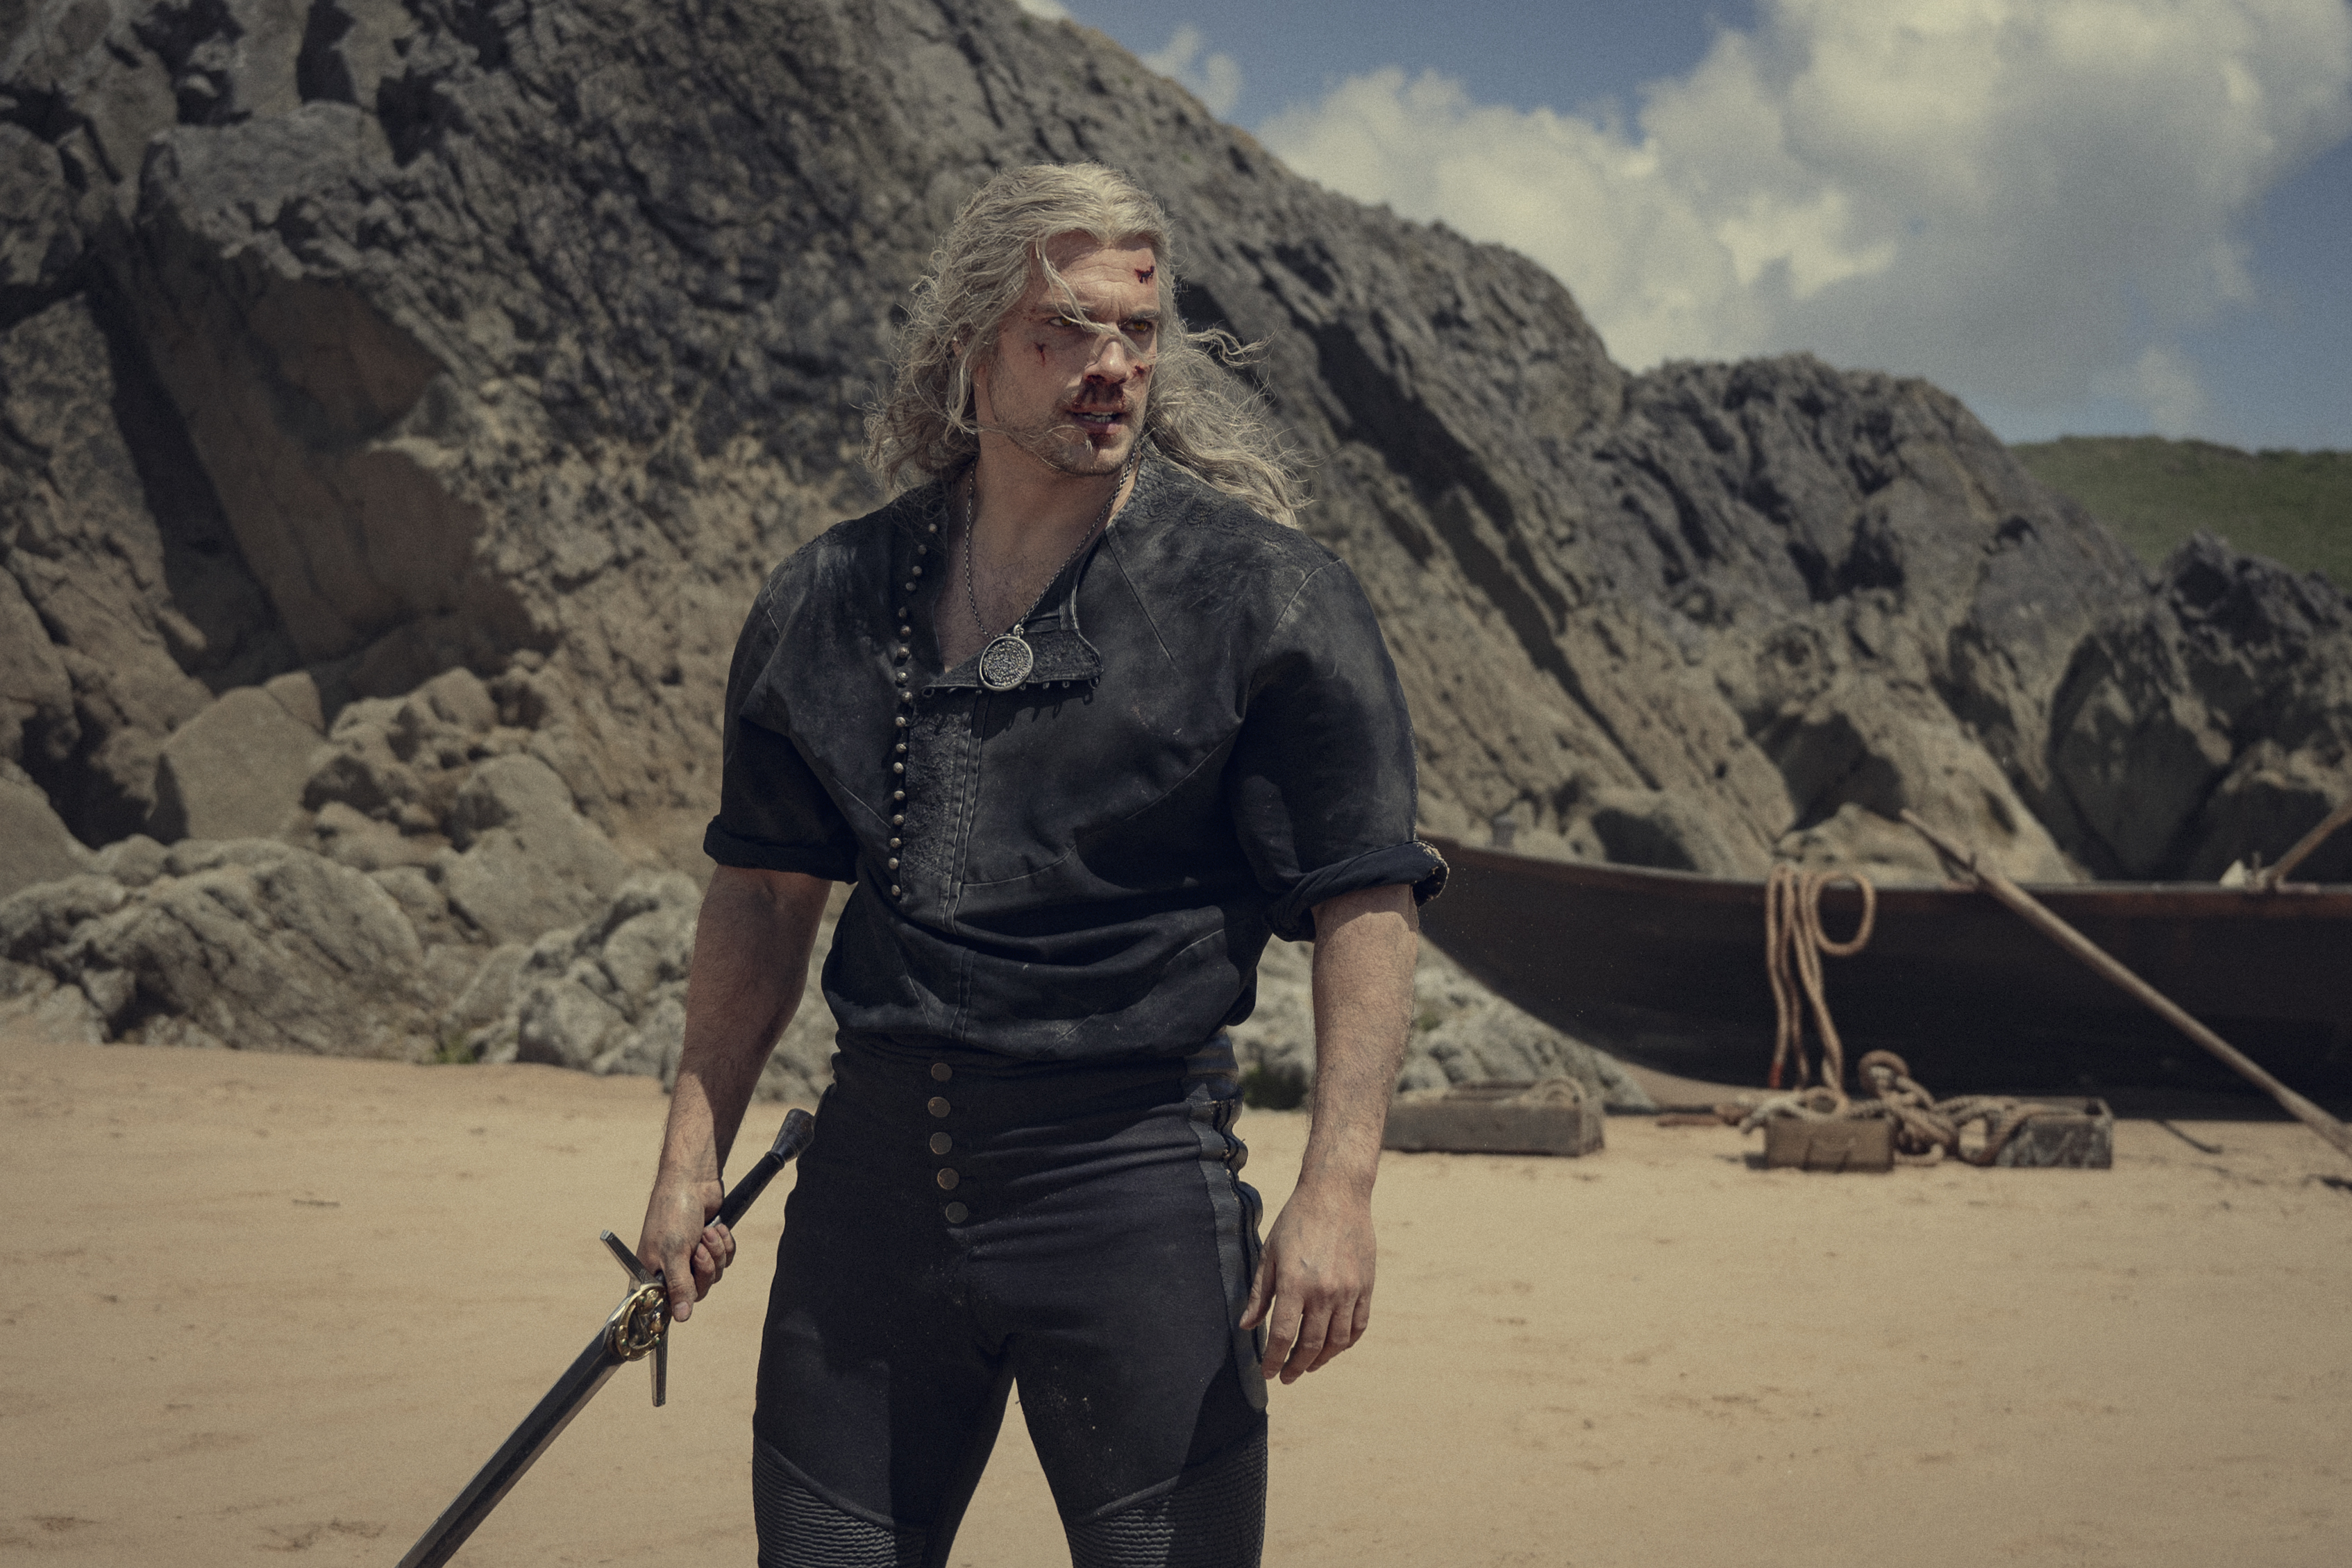 Geralt stands on a beach with a bloody nose and his sword held at his side in The Witcher season 3